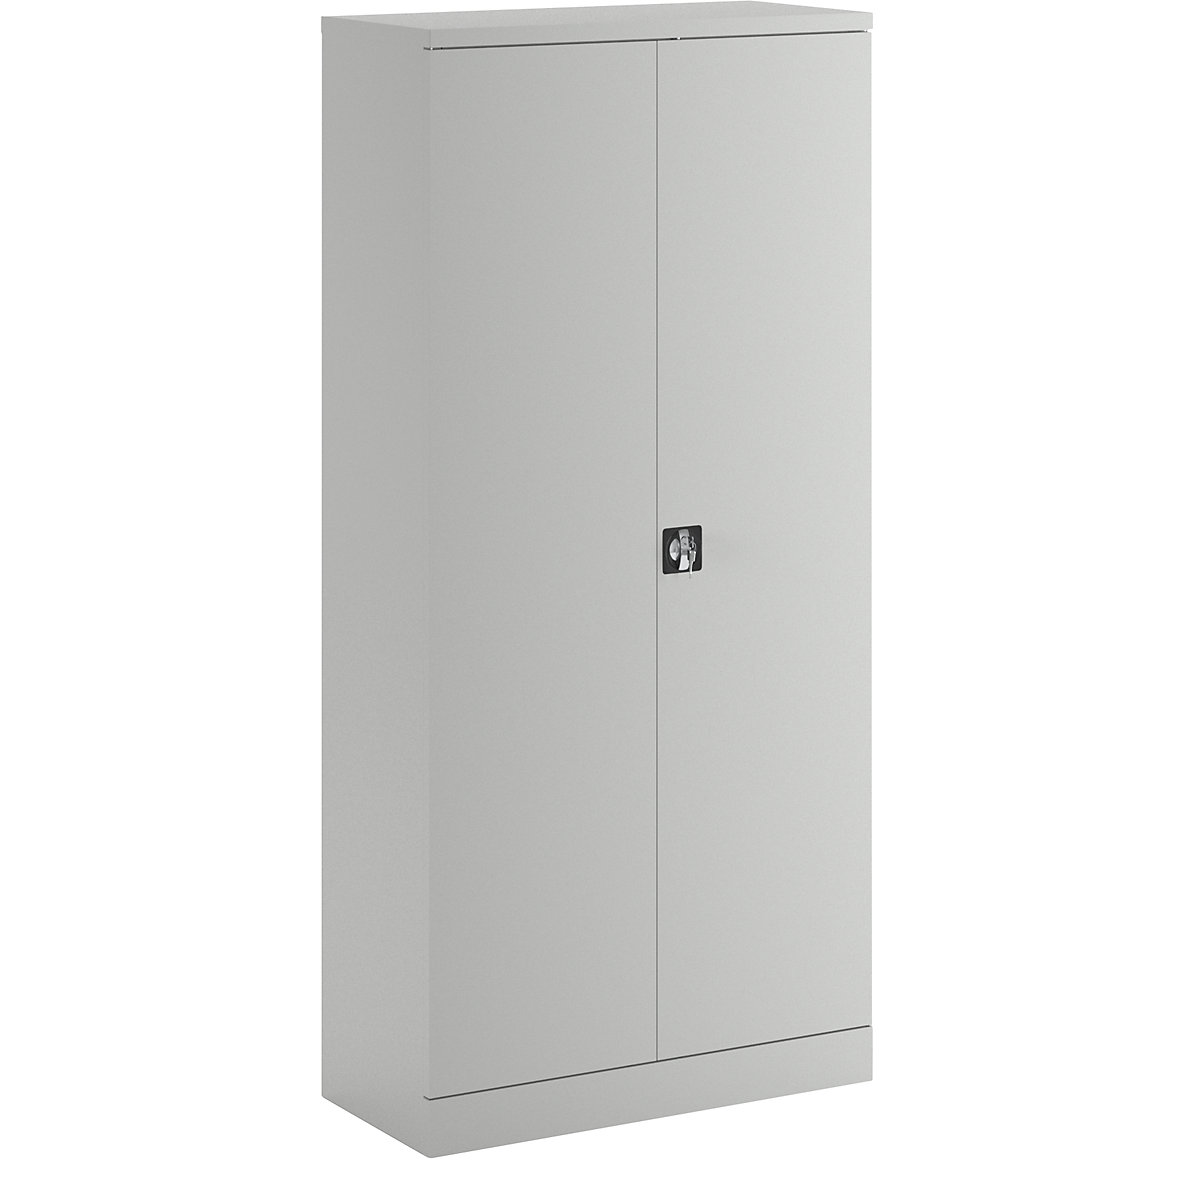 Universal cupboard with hinged doors and 4 shelves – eurokraft basic, HxWxD 1950 x 915 x 421 mm, body and doors light grey-3